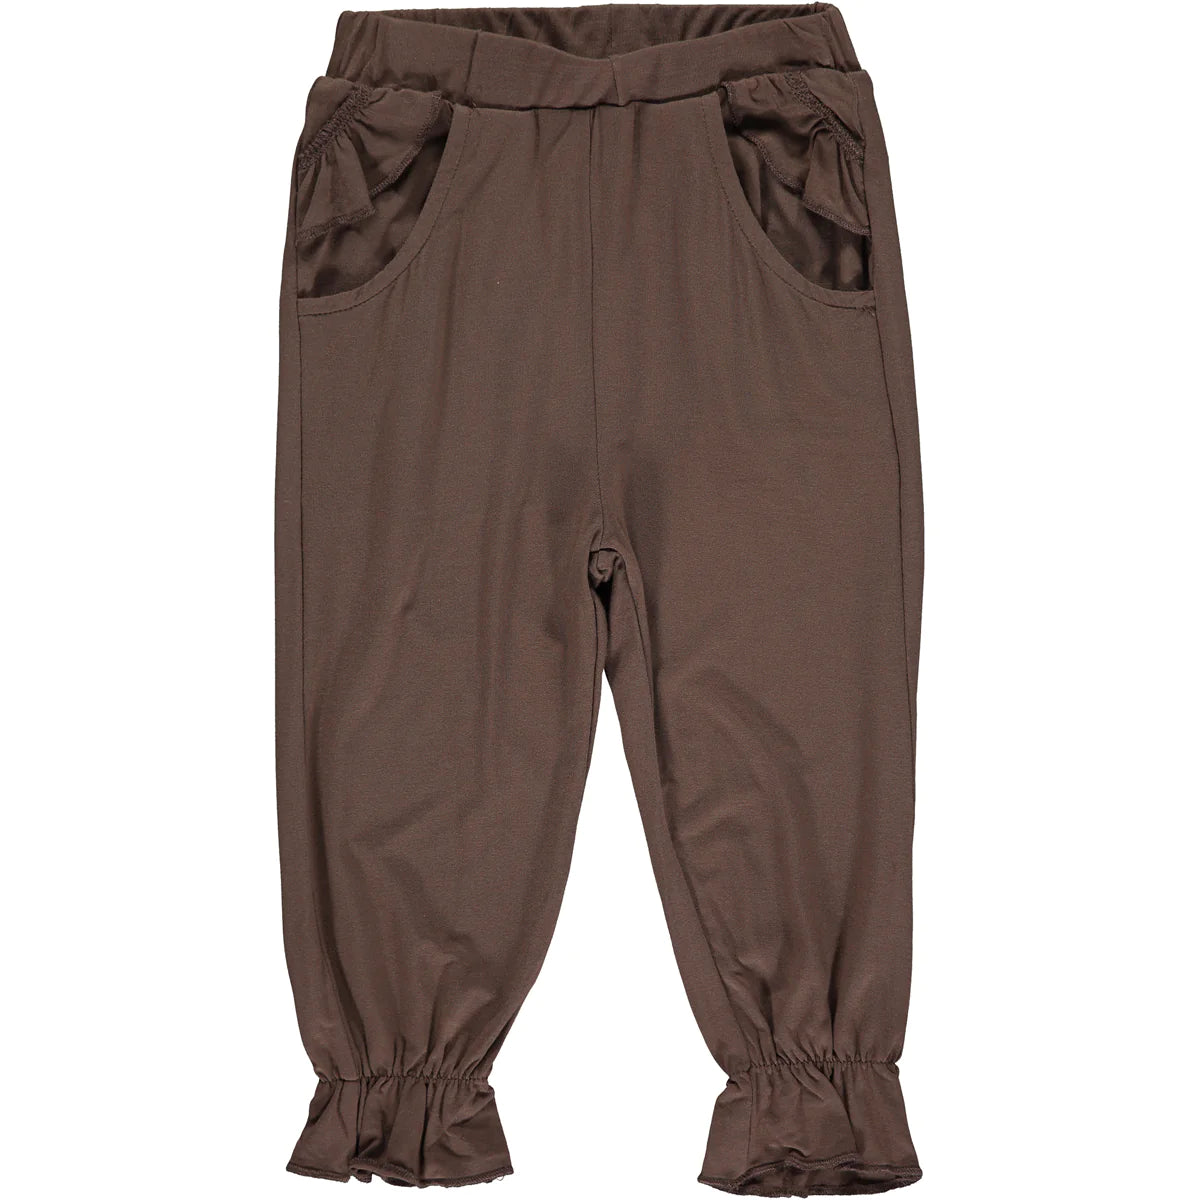 Your little one will be comfy and chic in these classicChocolate Ruffle Bamboo Pants. An essential for any wardrobe, they are made from buttery-soft bamboo fabric and feature softly gathered frills at the ankle and on the pockets. Pair with our Chocolate Frill Bamboo Onesie! 95% bamboo viscose, 5% spandex. Machine wash cold. 